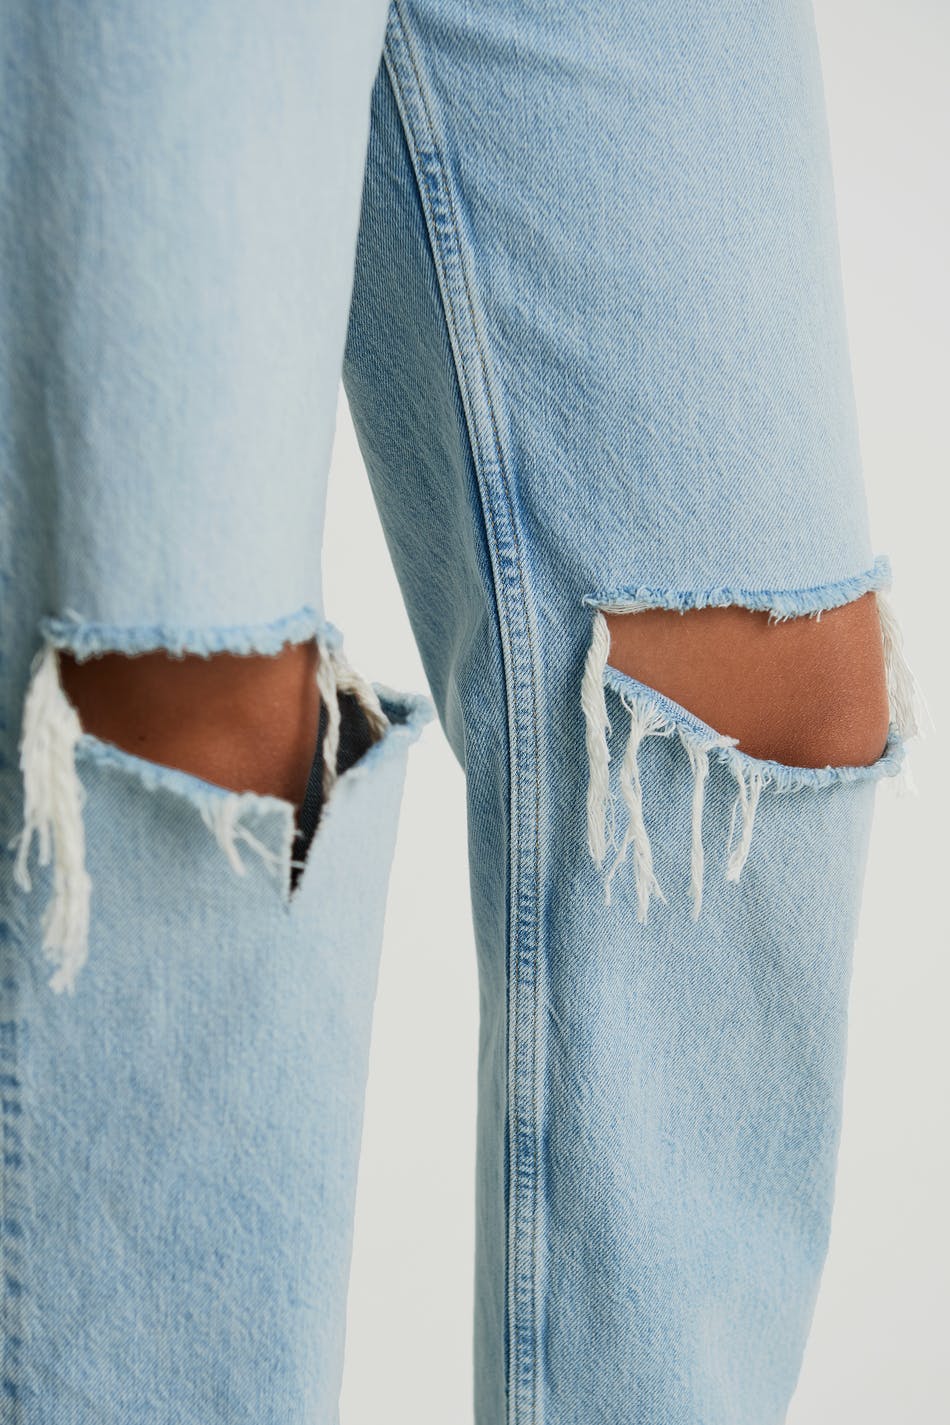 perfect jeans gina tricot